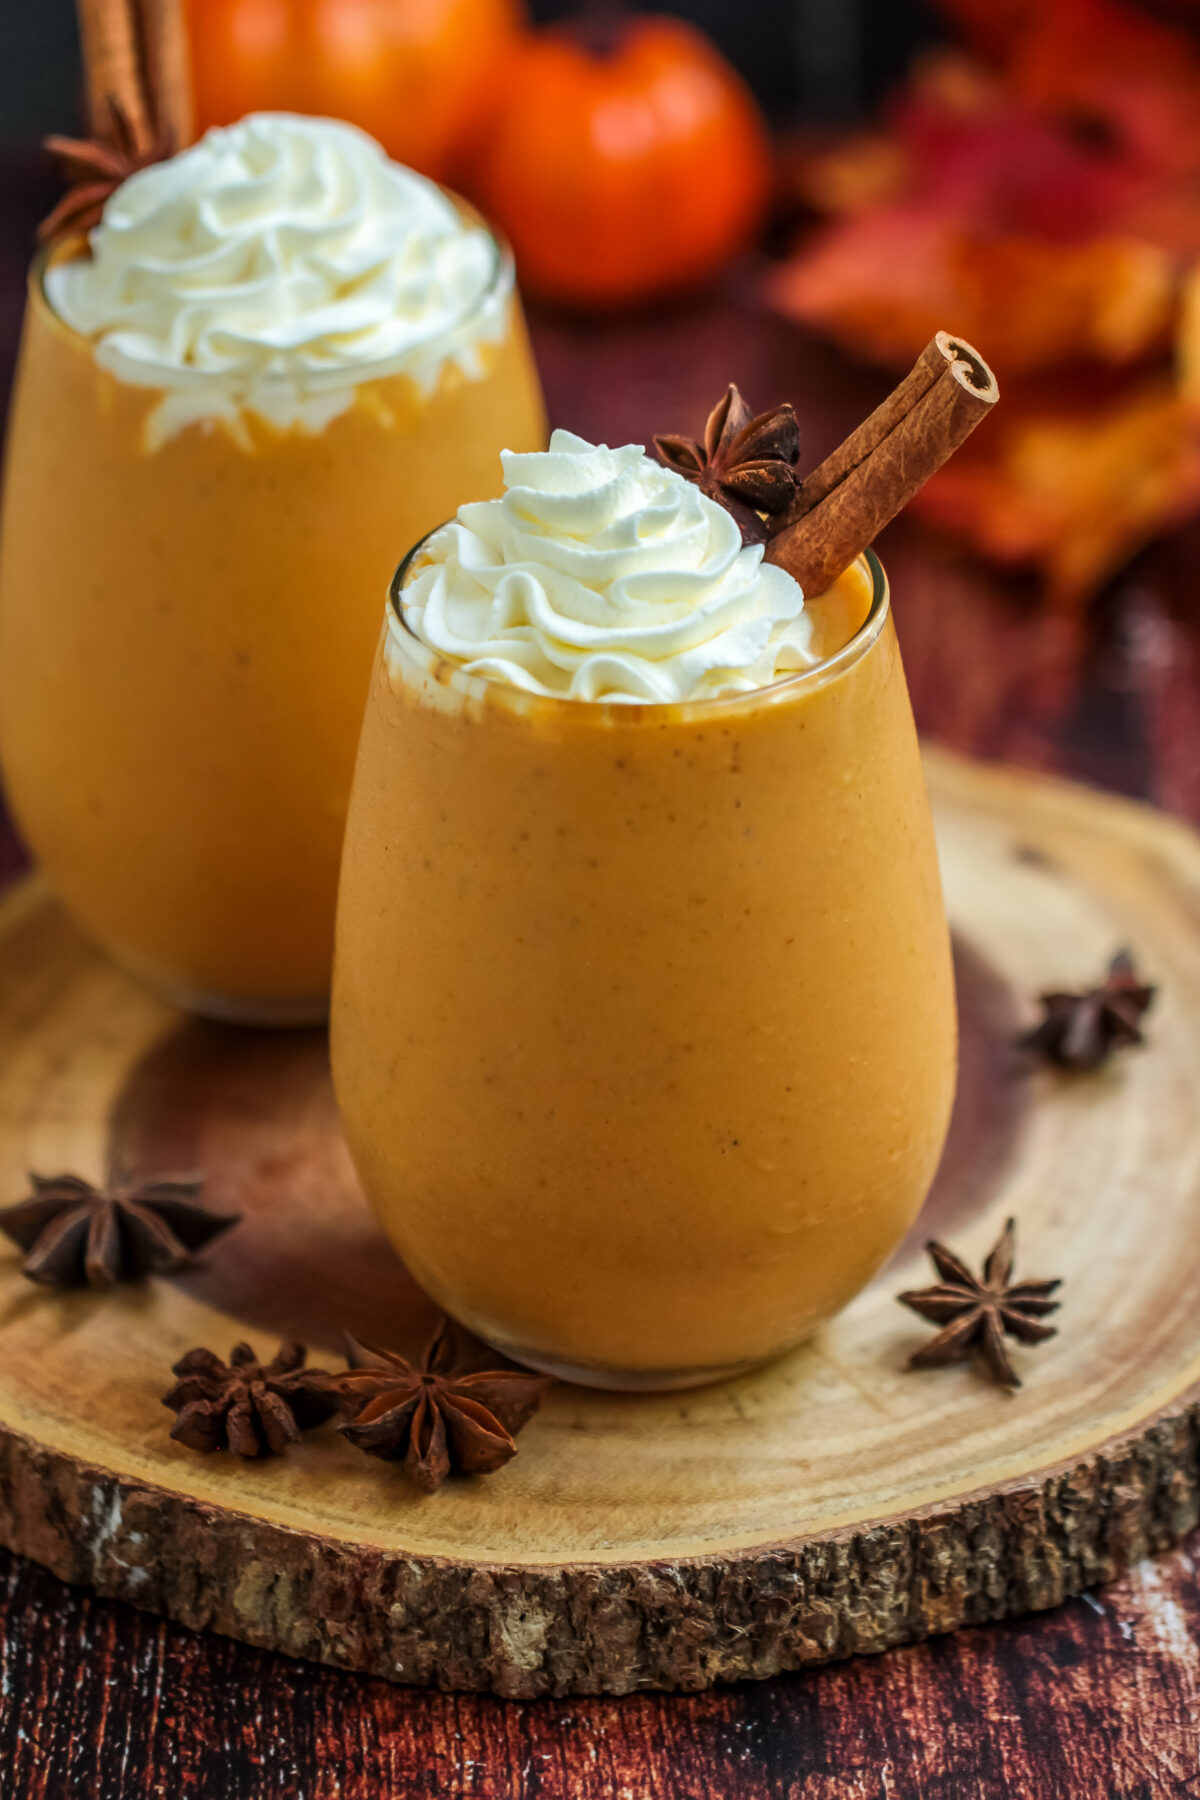 This healthy pumpkin pie smoothie is a great way to use up leftover canned pumpkin puree from Thanksgiving. A delicious fall treat!